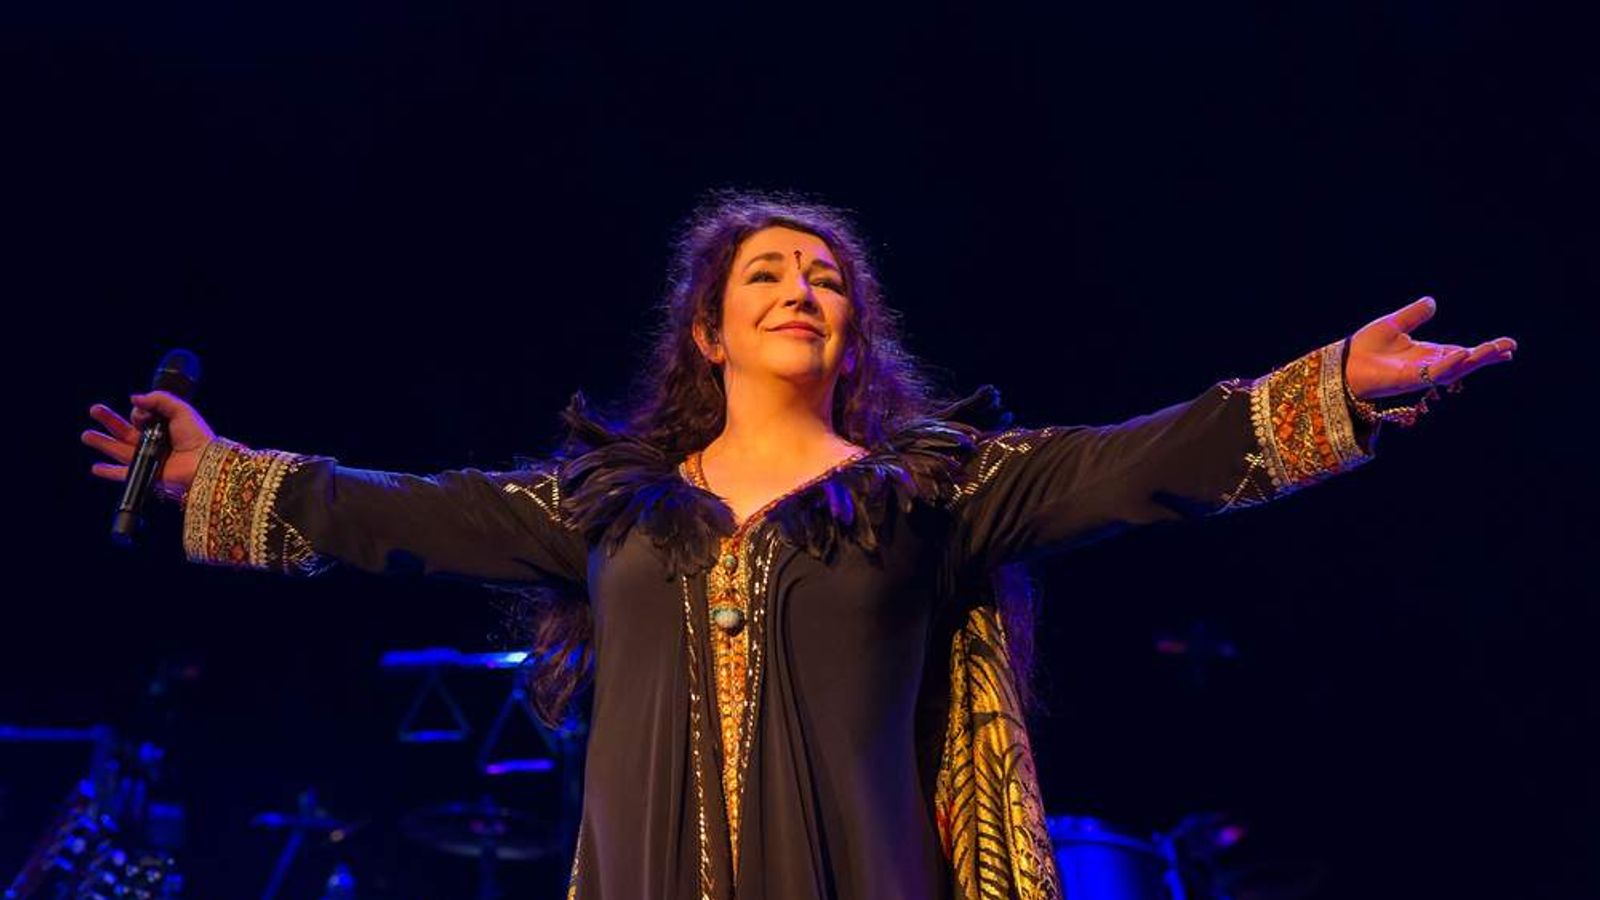 Kate Bush Returns To The Stage After 35 Years Ents & Arts News Sky News